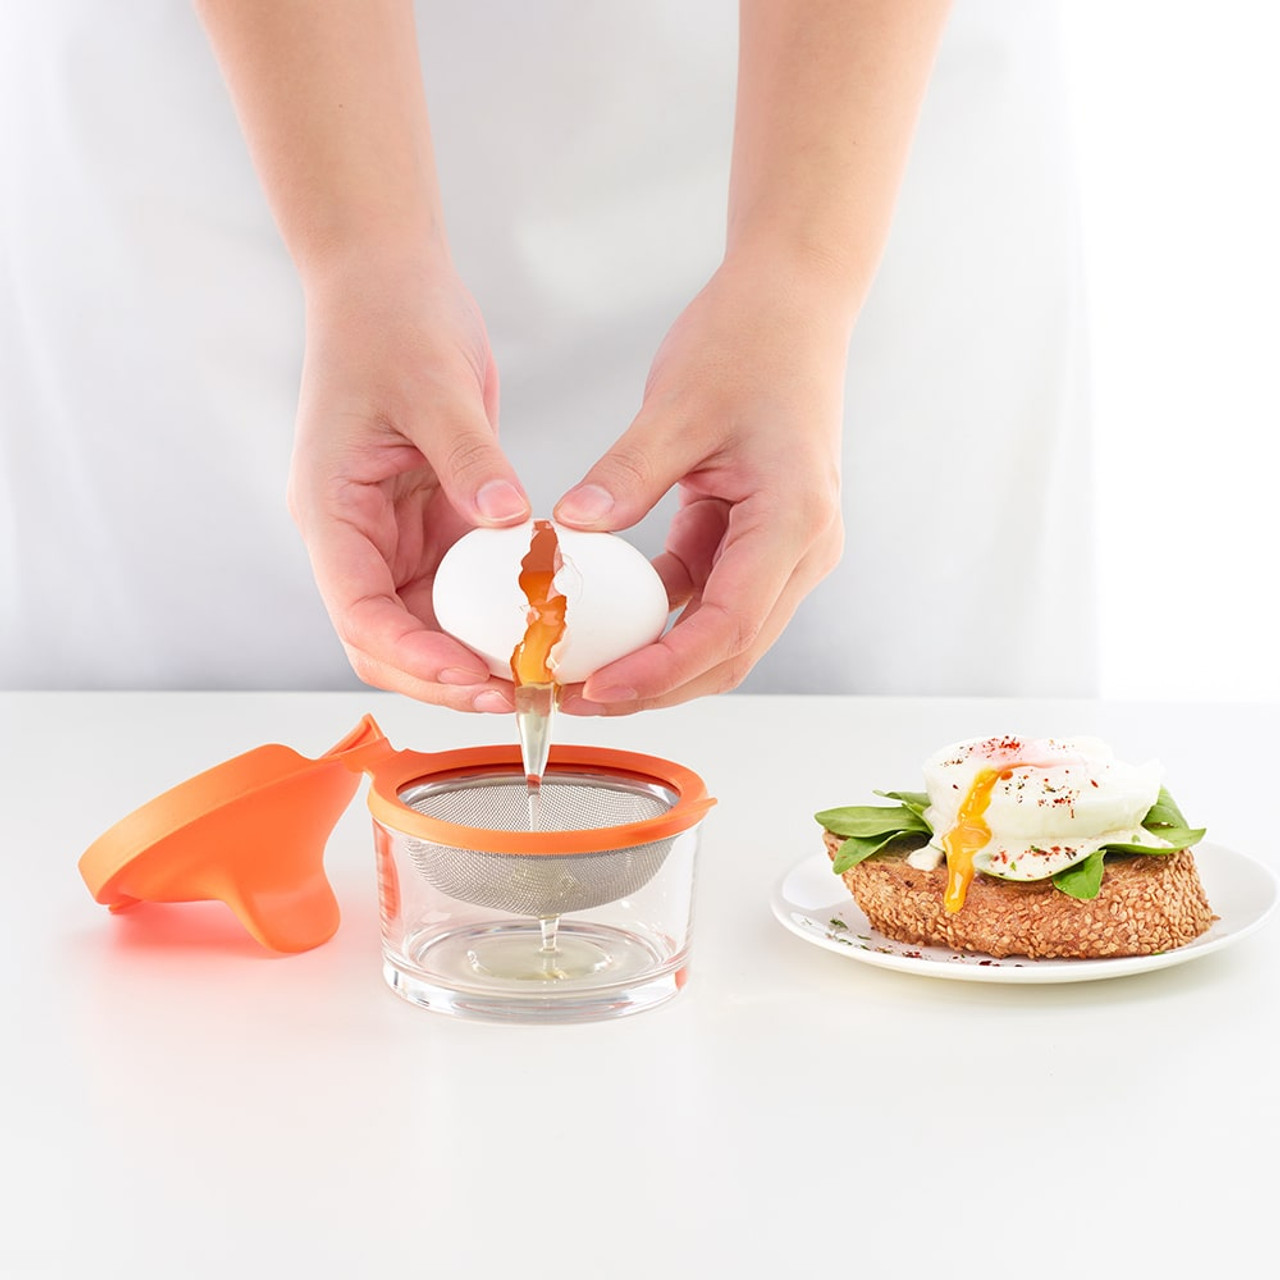 https://cdn11.bigcommerce.com/s-hccytny0od/images/stencil/1280x1280/products/3879/14101/lekue-poached-egg-cookers-set-1__57592.1610888004.jpg?c=2?imbypass=on